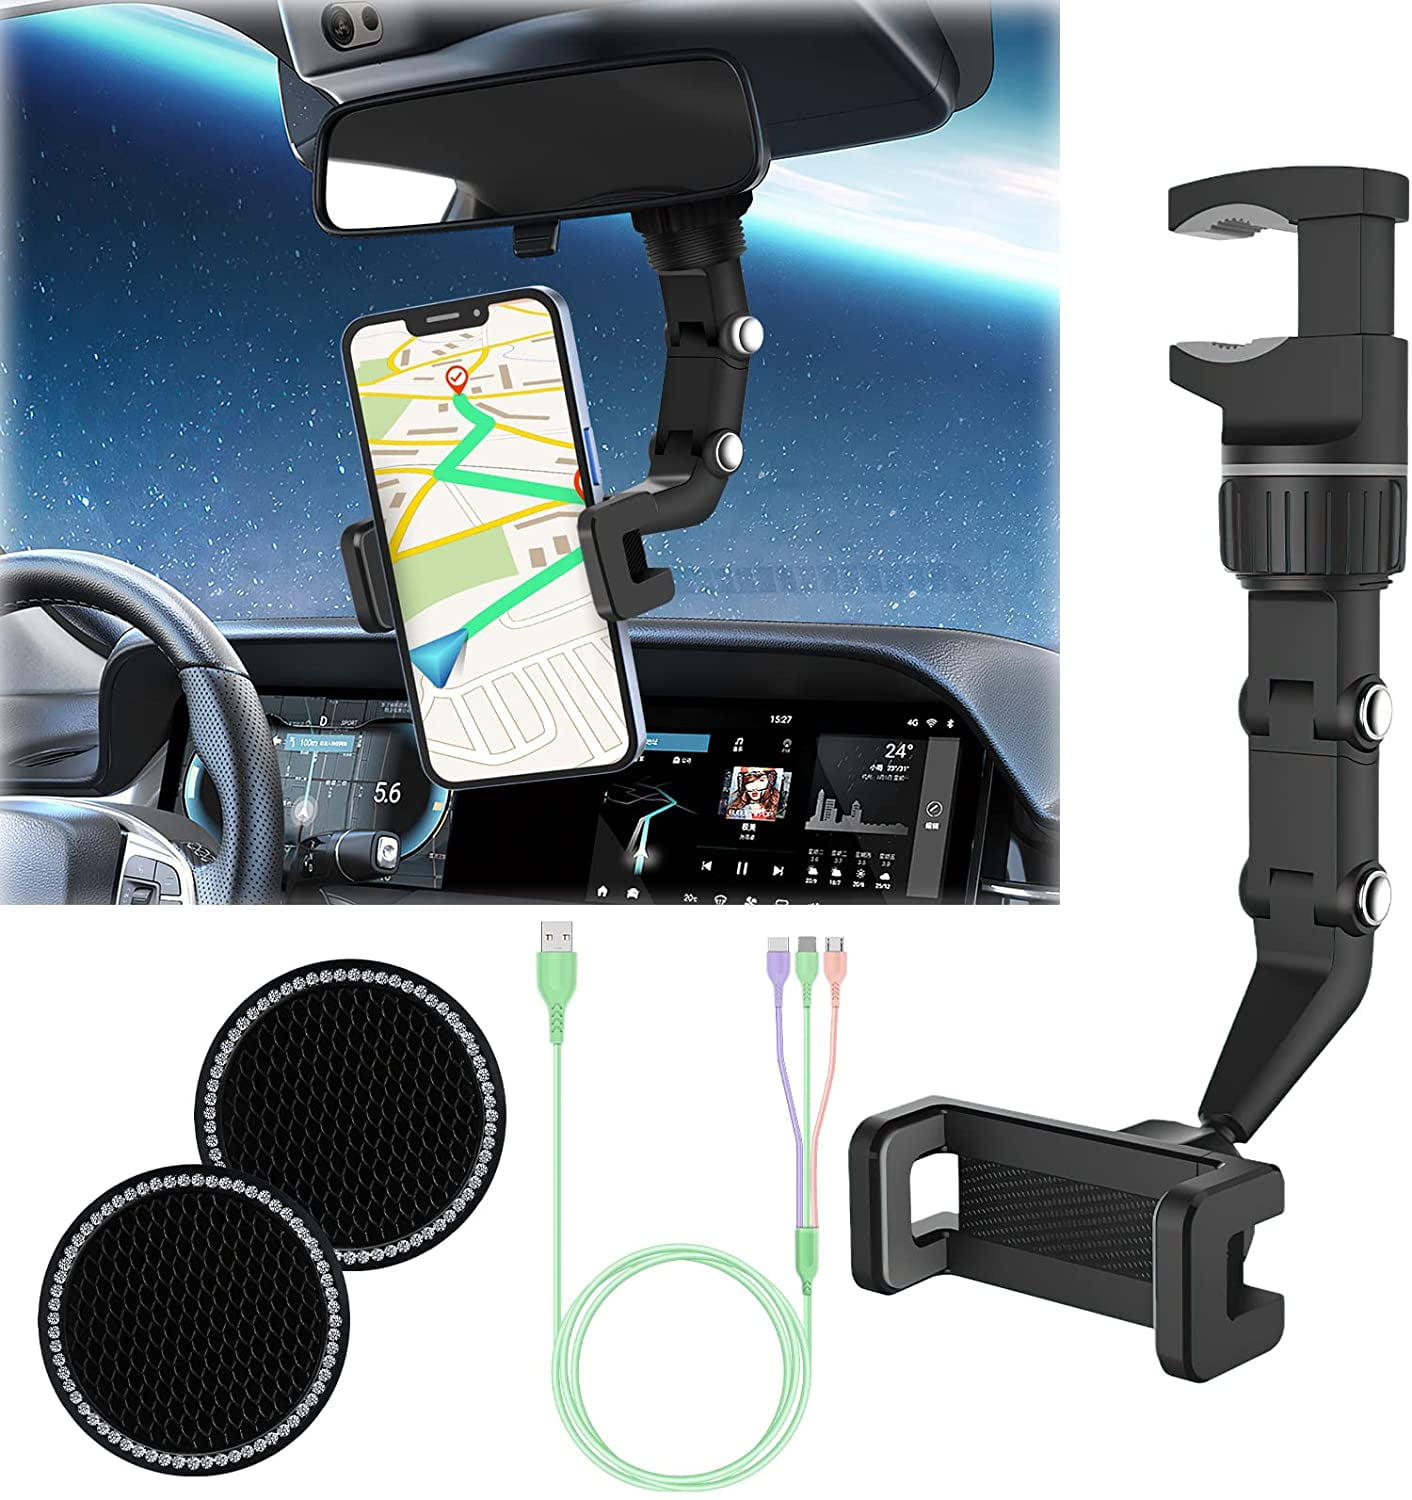 Phone Mount for Car, 360°Rotatable and Retractable Car Phone Holder Mount  Multifunctional Rearview M…See more Phone Mount for Car, 360°Rotatable and